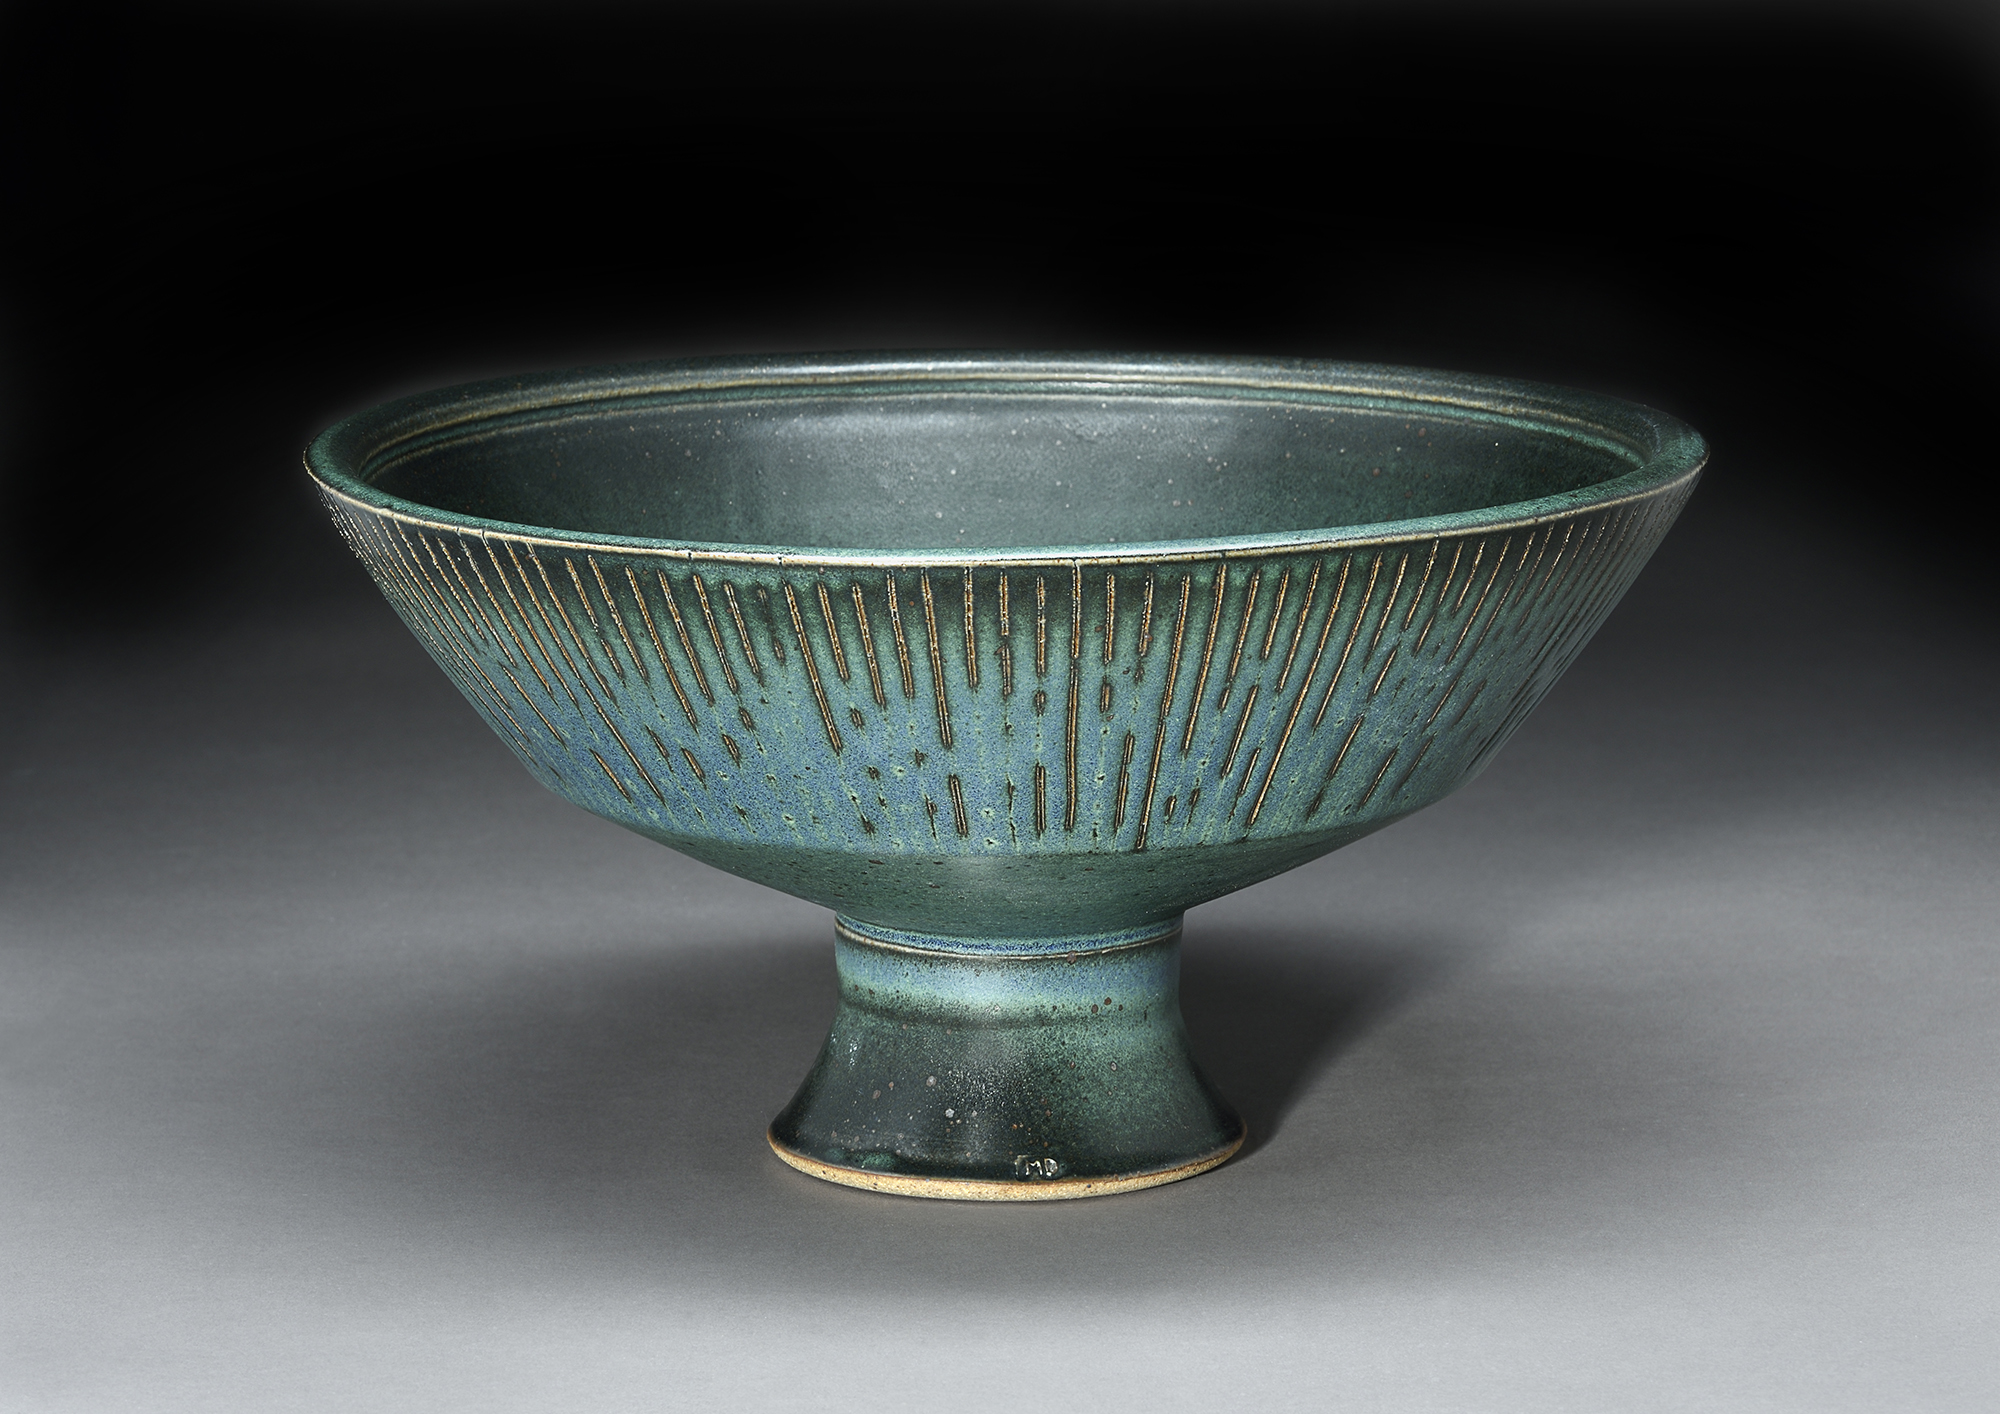 A green and black vessel created by Marian Draper.